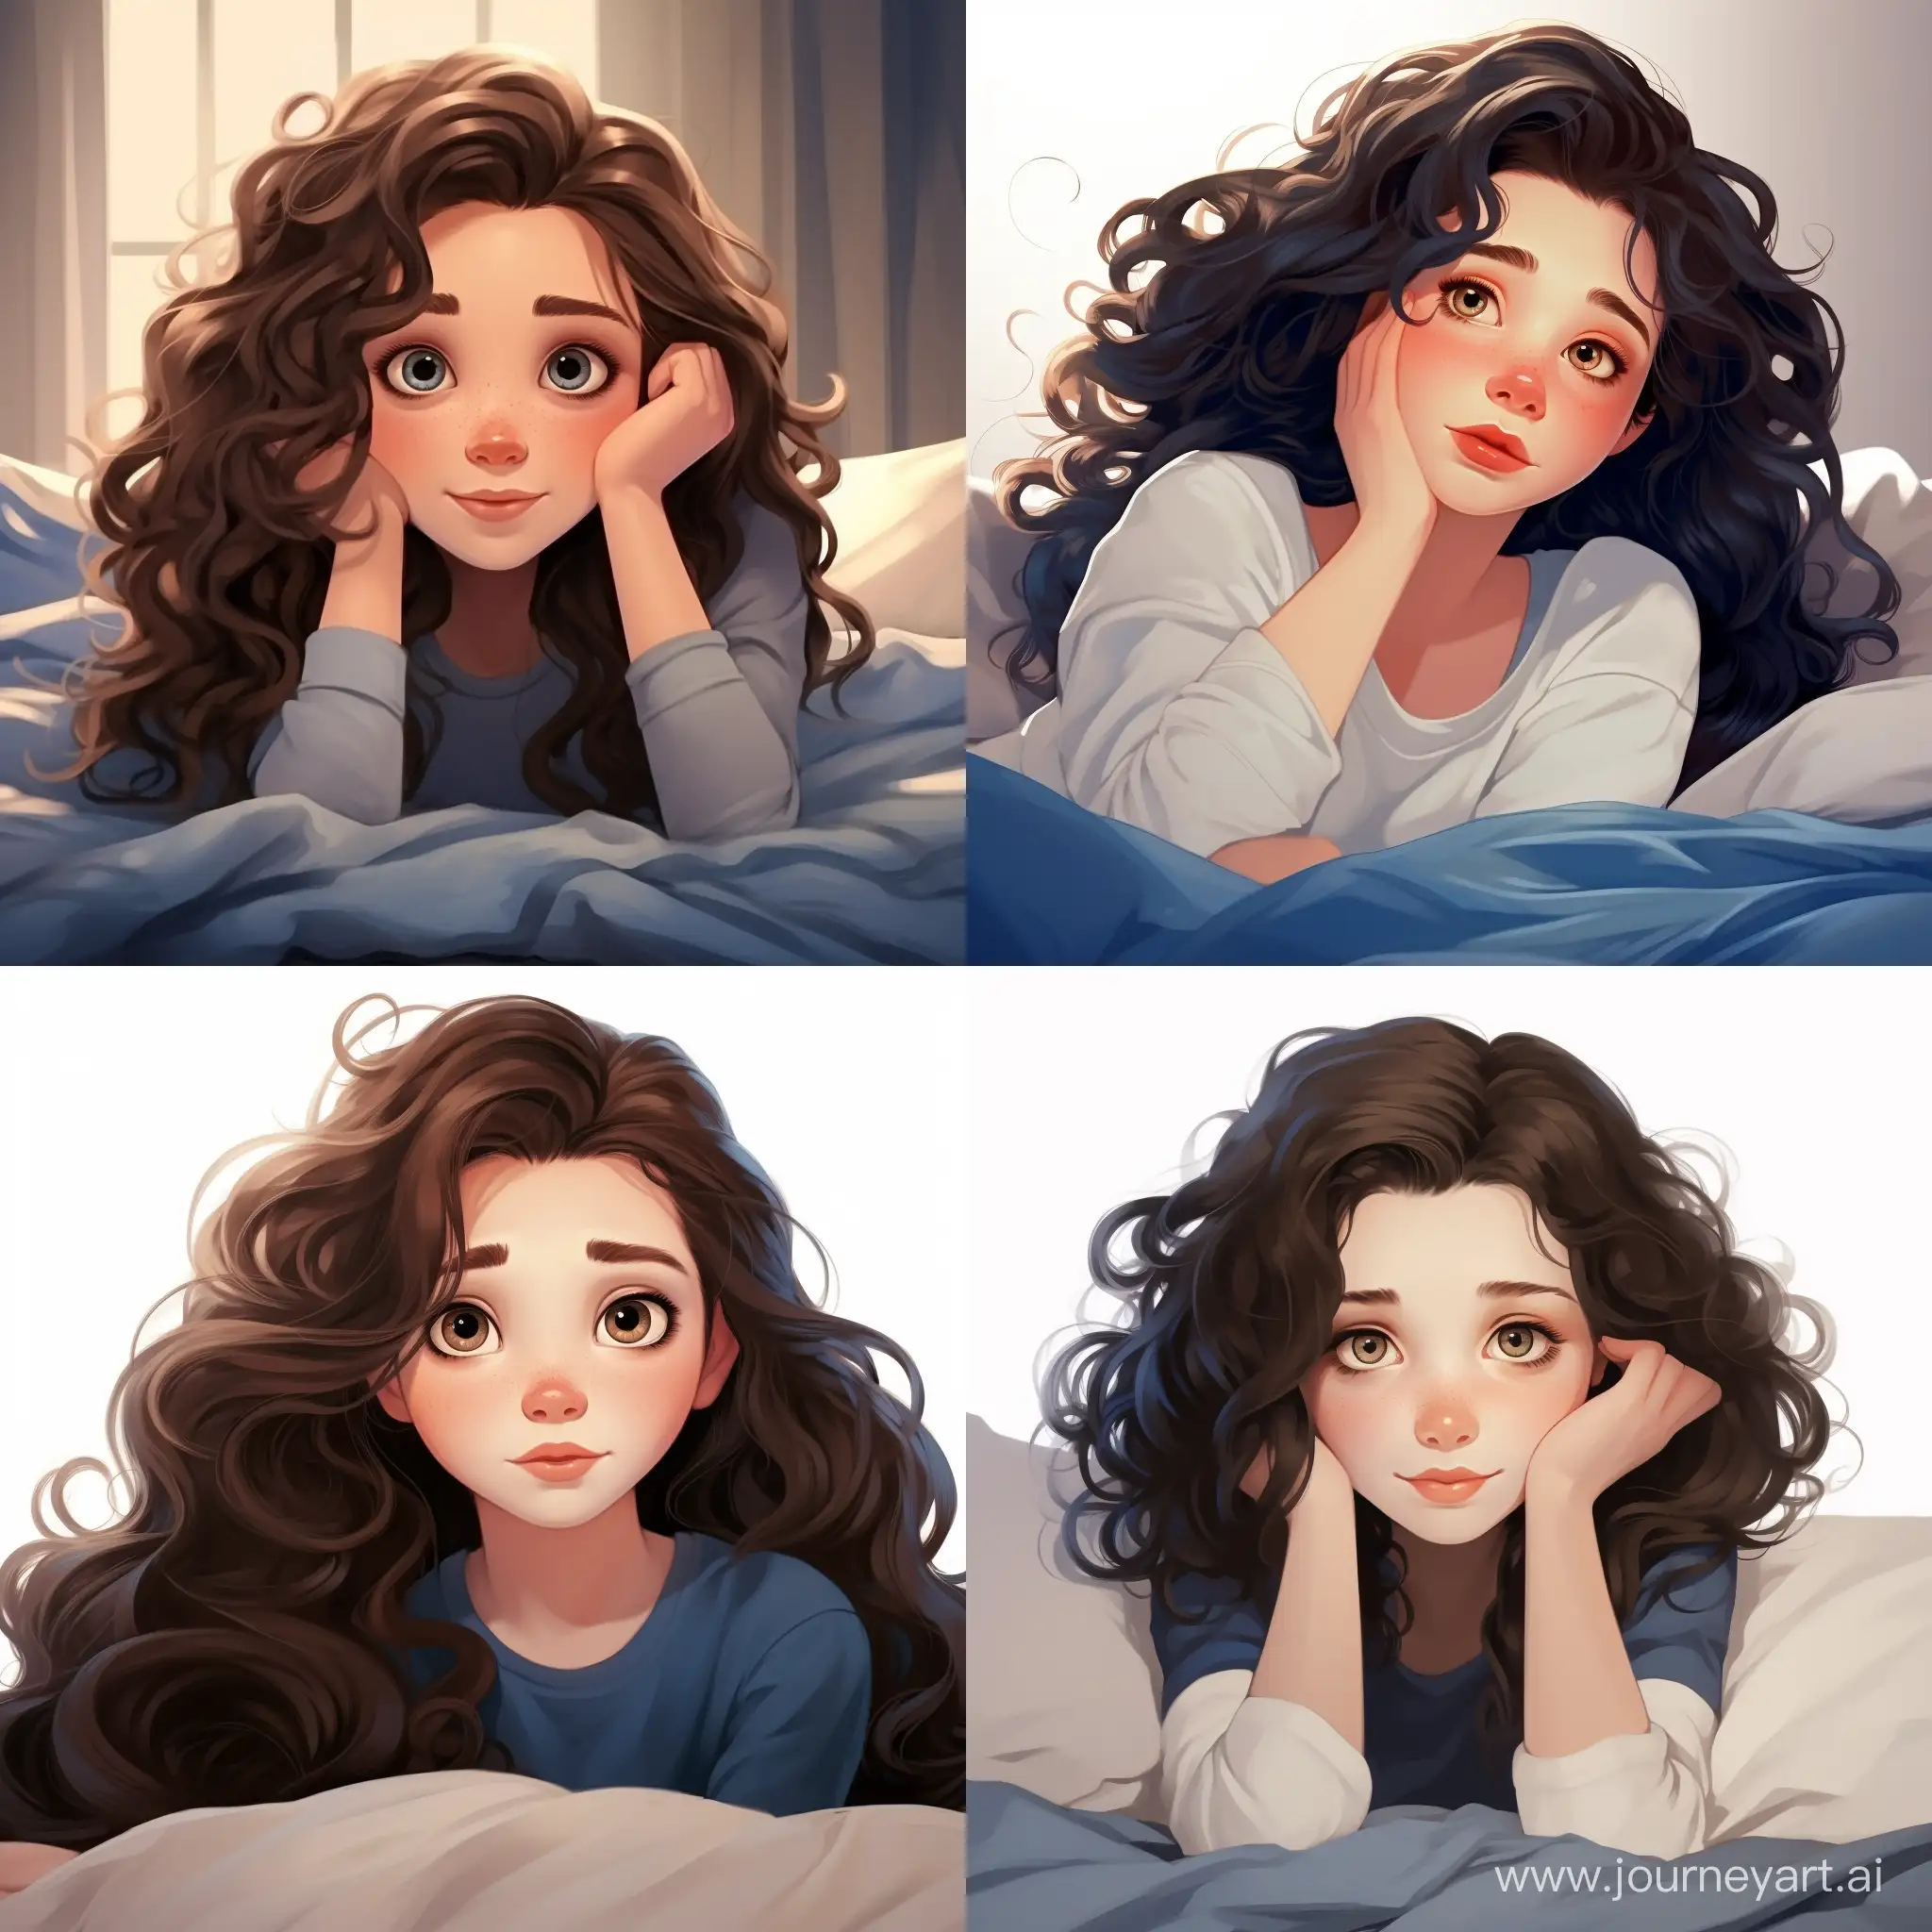 Expressive-Teenager-with-Dark-Wavy-Hair-Relaxing-on-Bed-High-Detail-Cartoon-Art